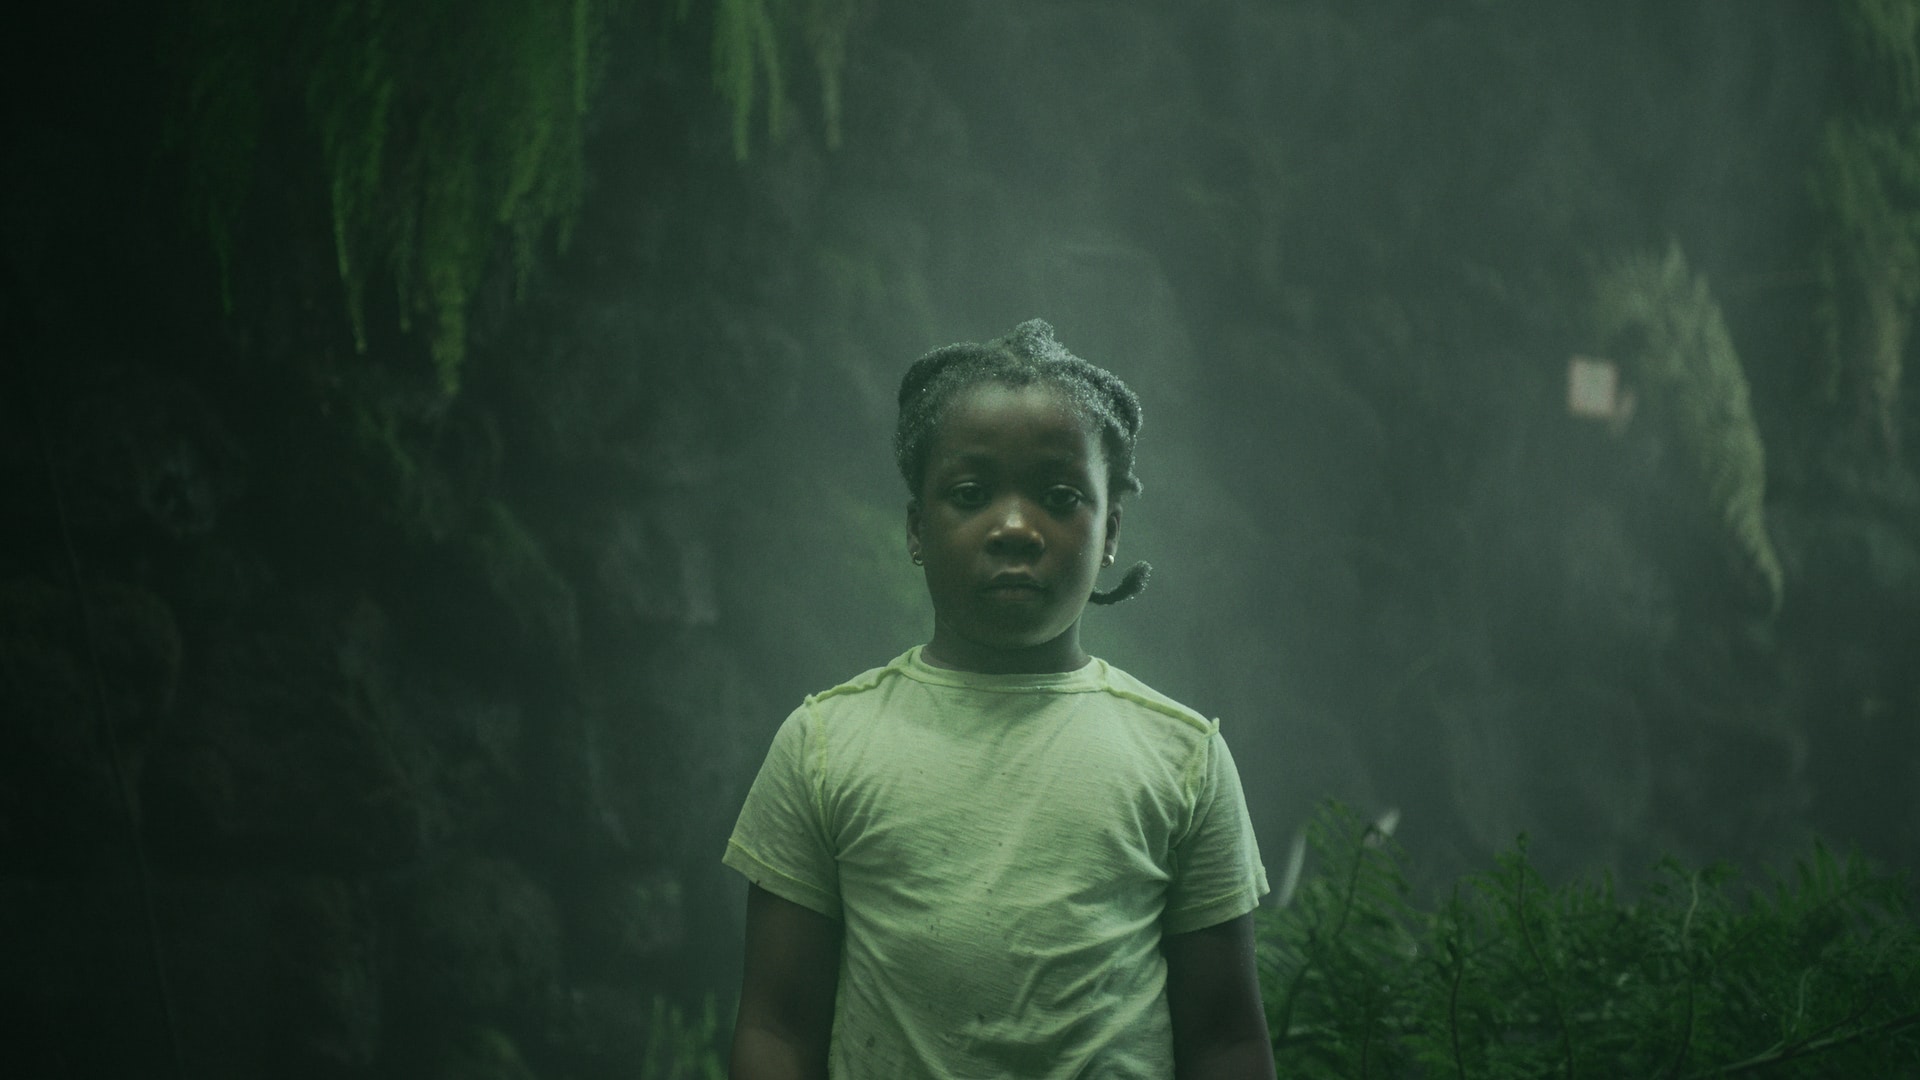 A young girl standing in the mist, with droplets of water in her hair.